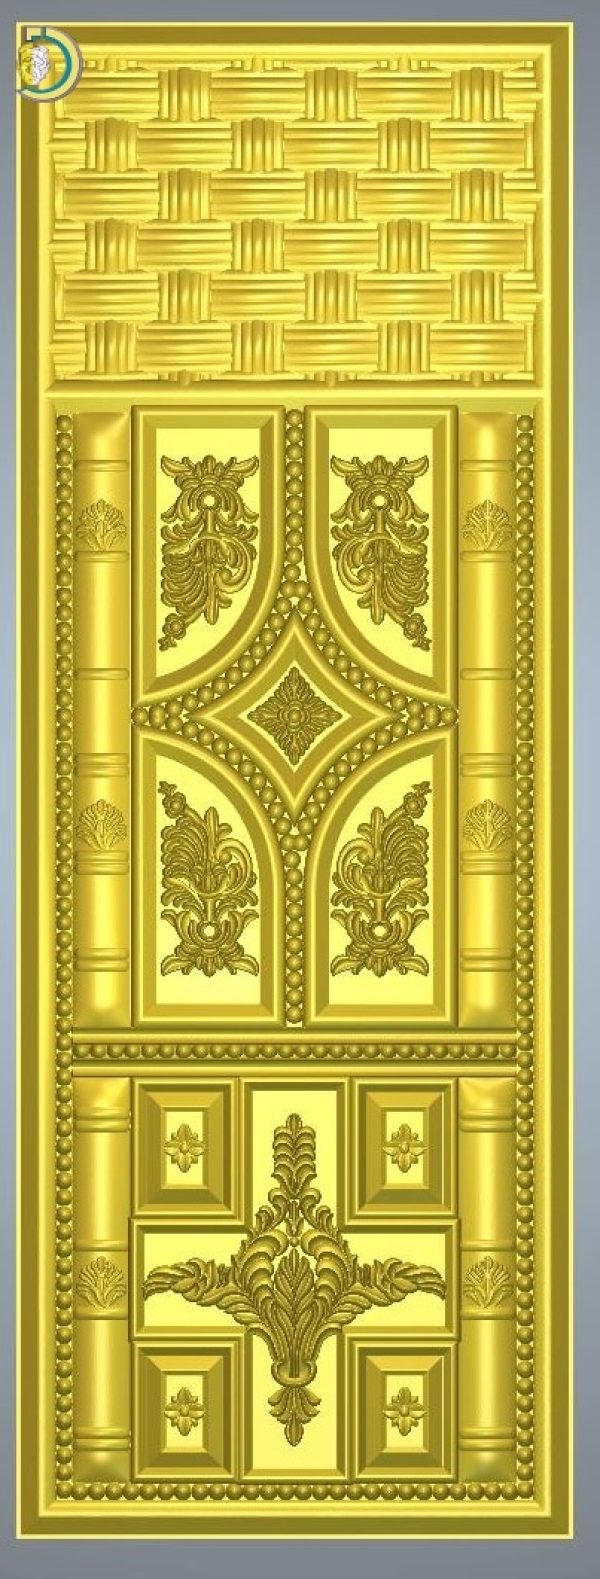 3D Door Design 039 Wood Carving Free RLF File For CNC Router